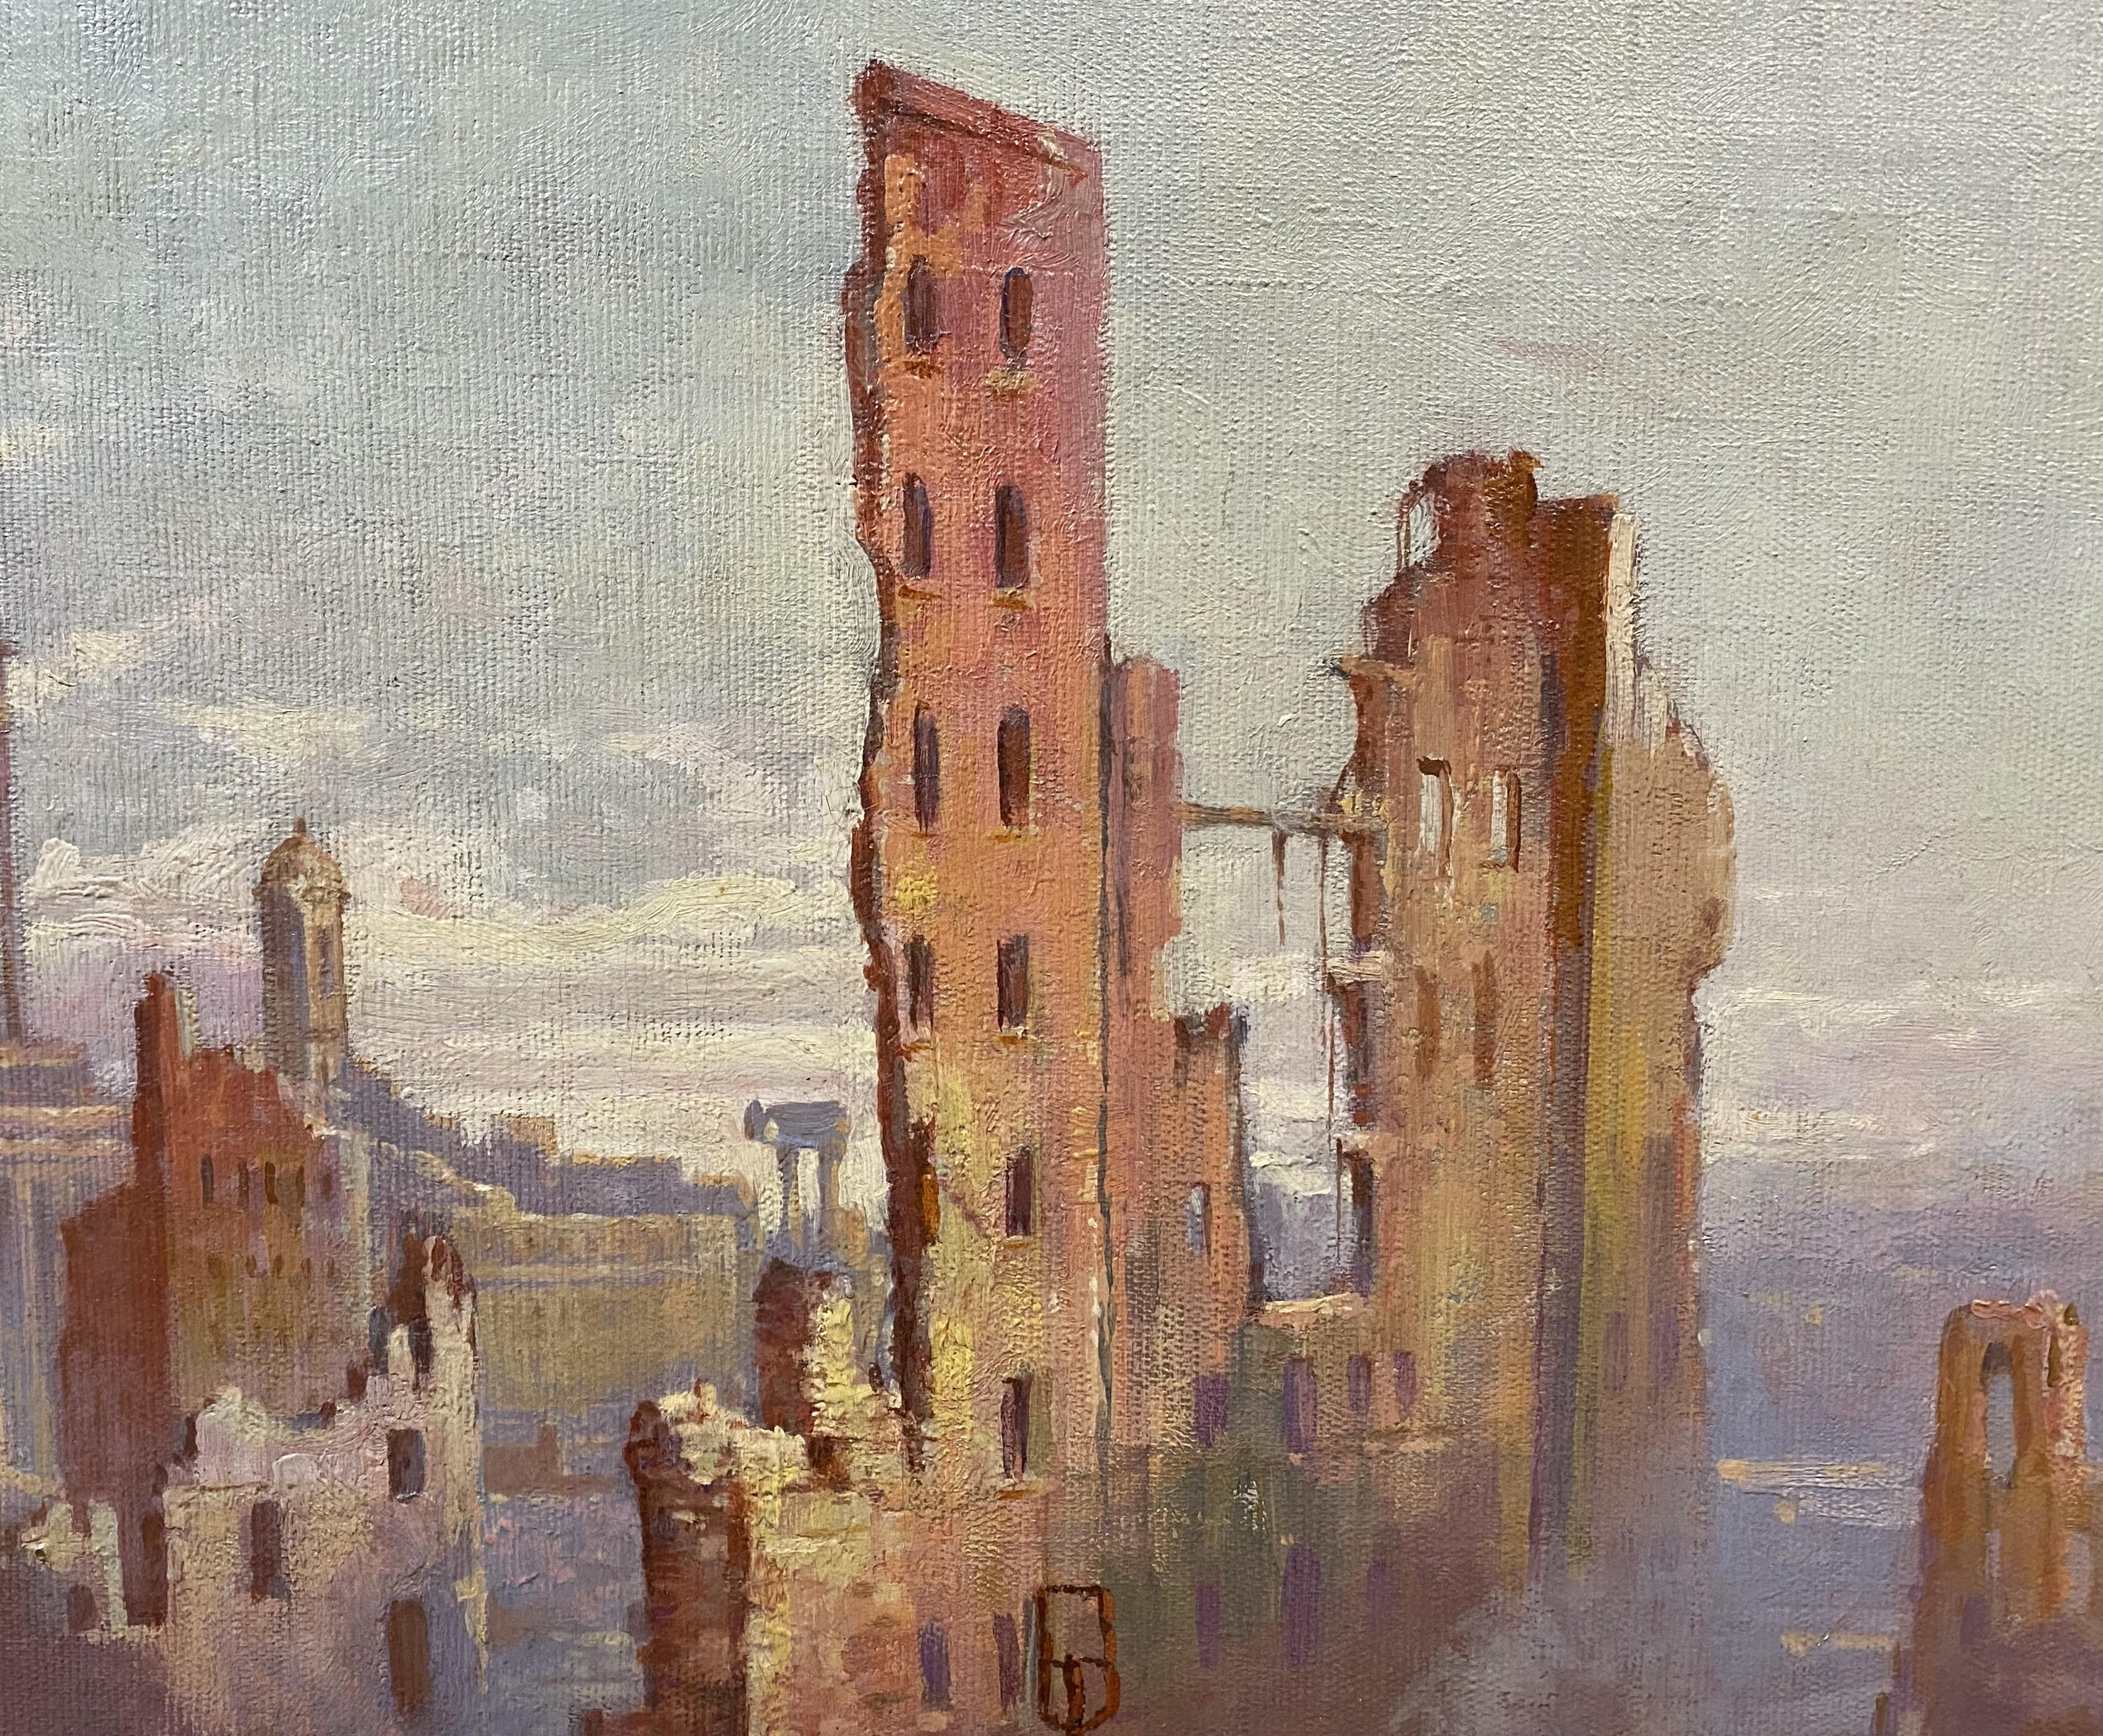  The Ruins of the San Francisco Earthquake & Fire - American Impressionist Painting by Henry Deidrich Gremke